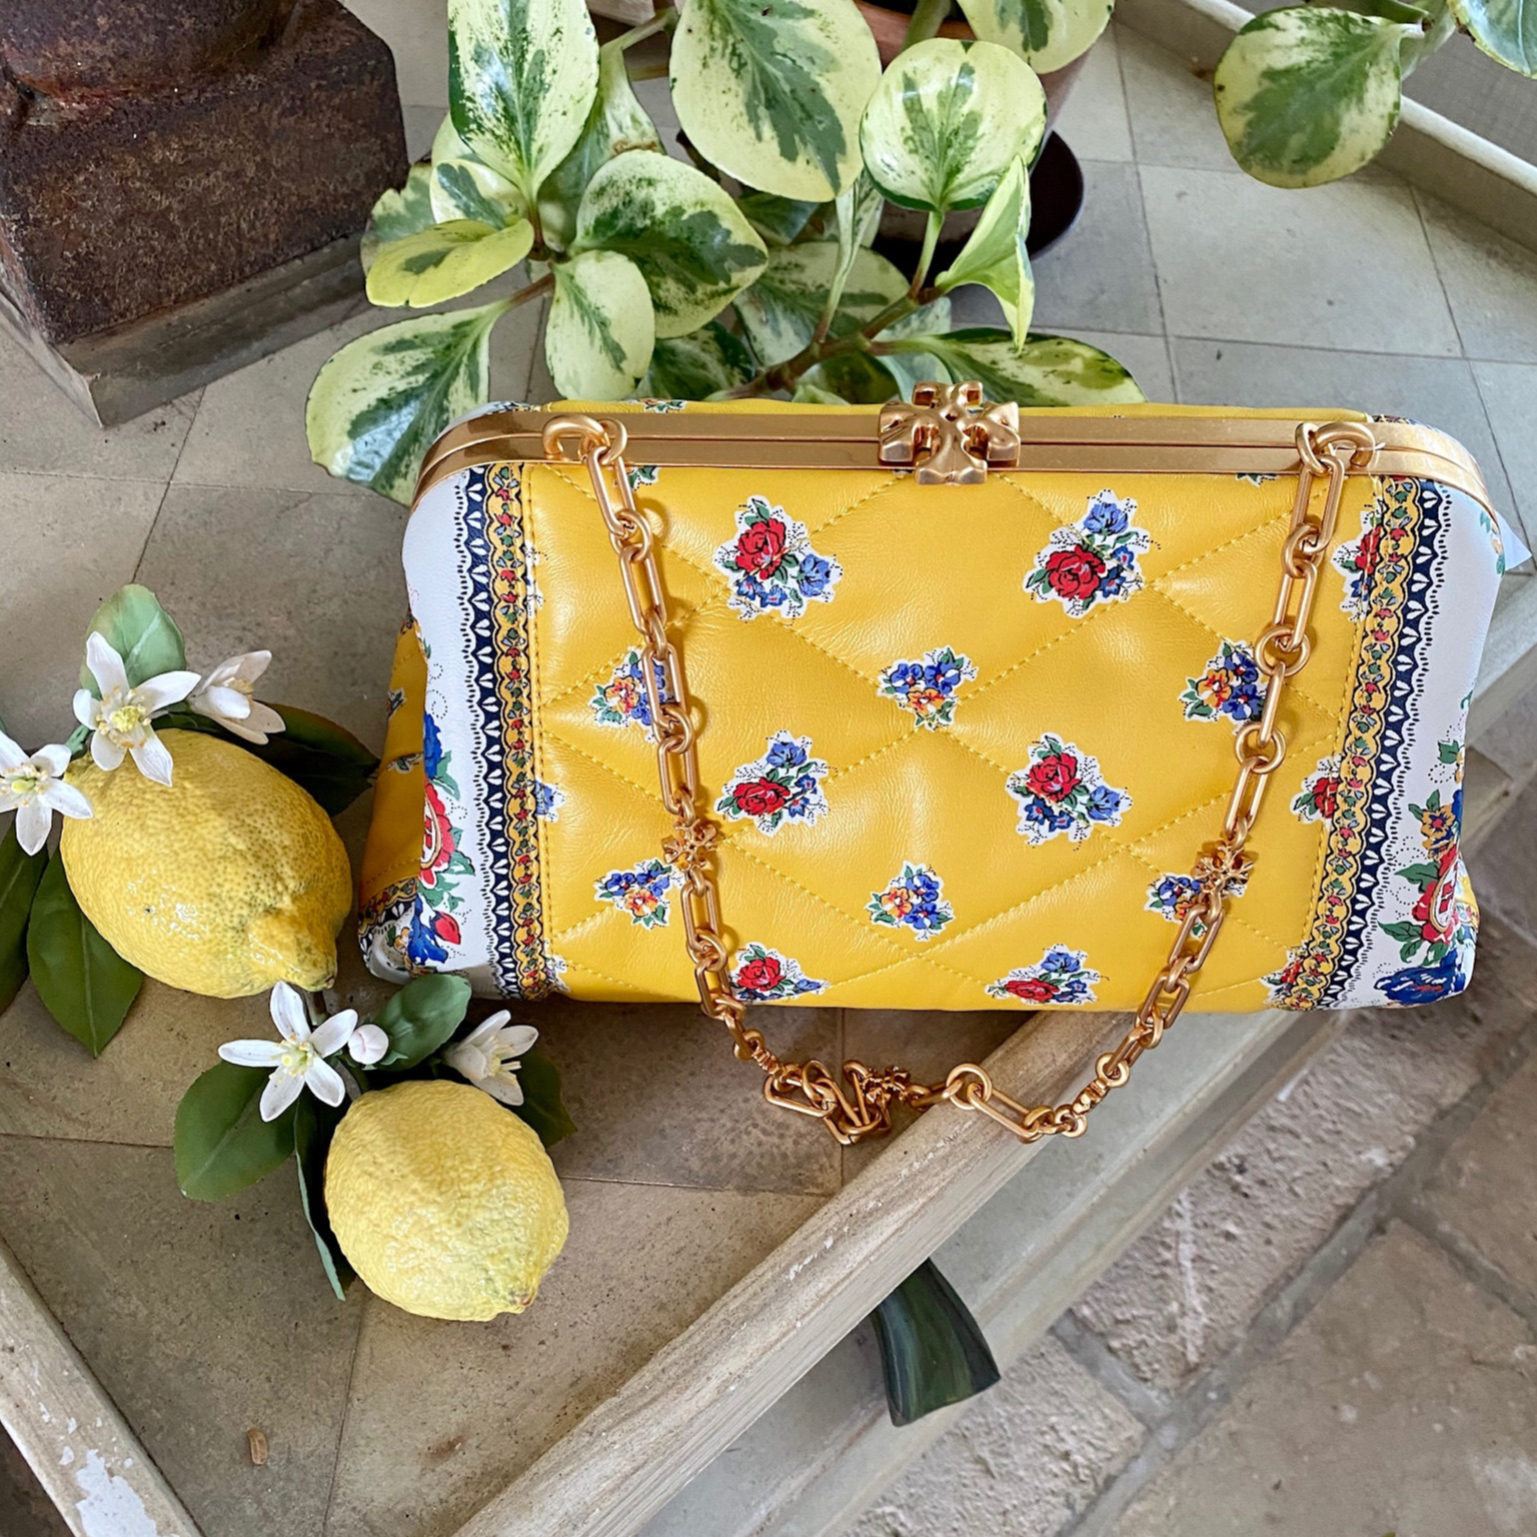 Tory Burch on X: 🍋 💛🌼☀️The new Cleo Quilted Floral Bag #ToryBurchSS20  #ToryBurchBags #ToryBurch    / X